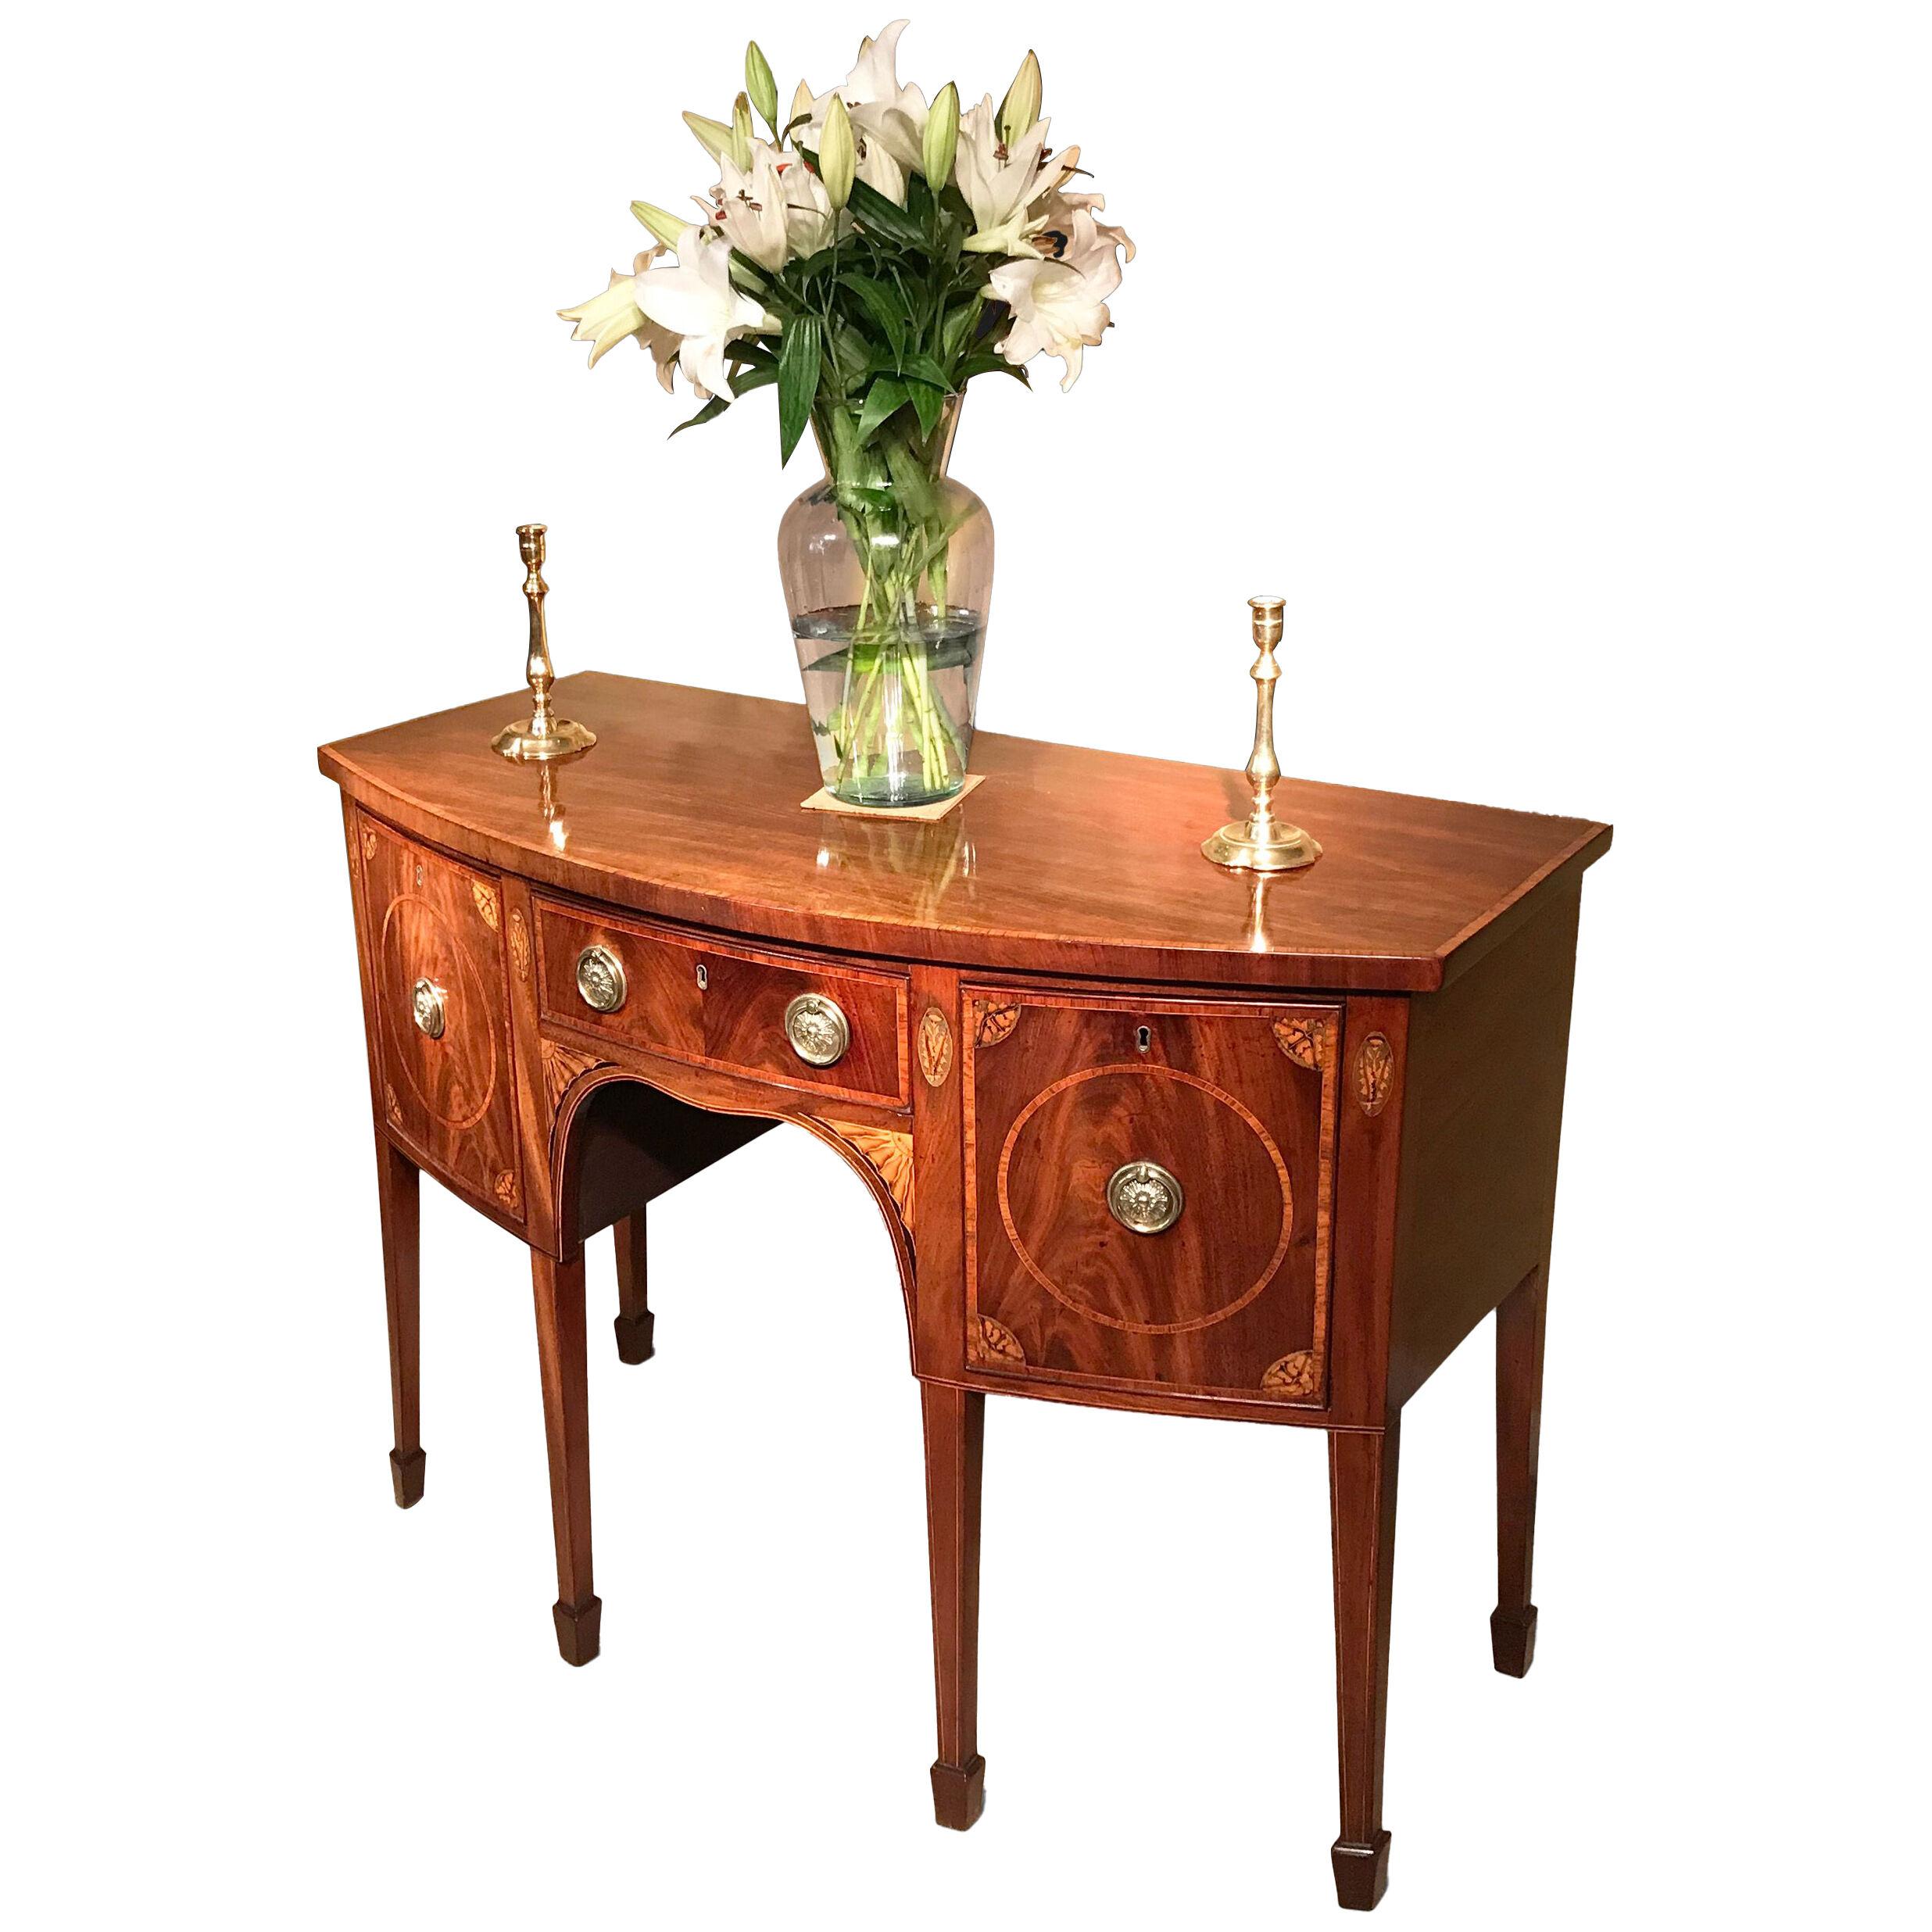 Scottish George III Mahogany and Crossbanded Bow Fronted Sideboard